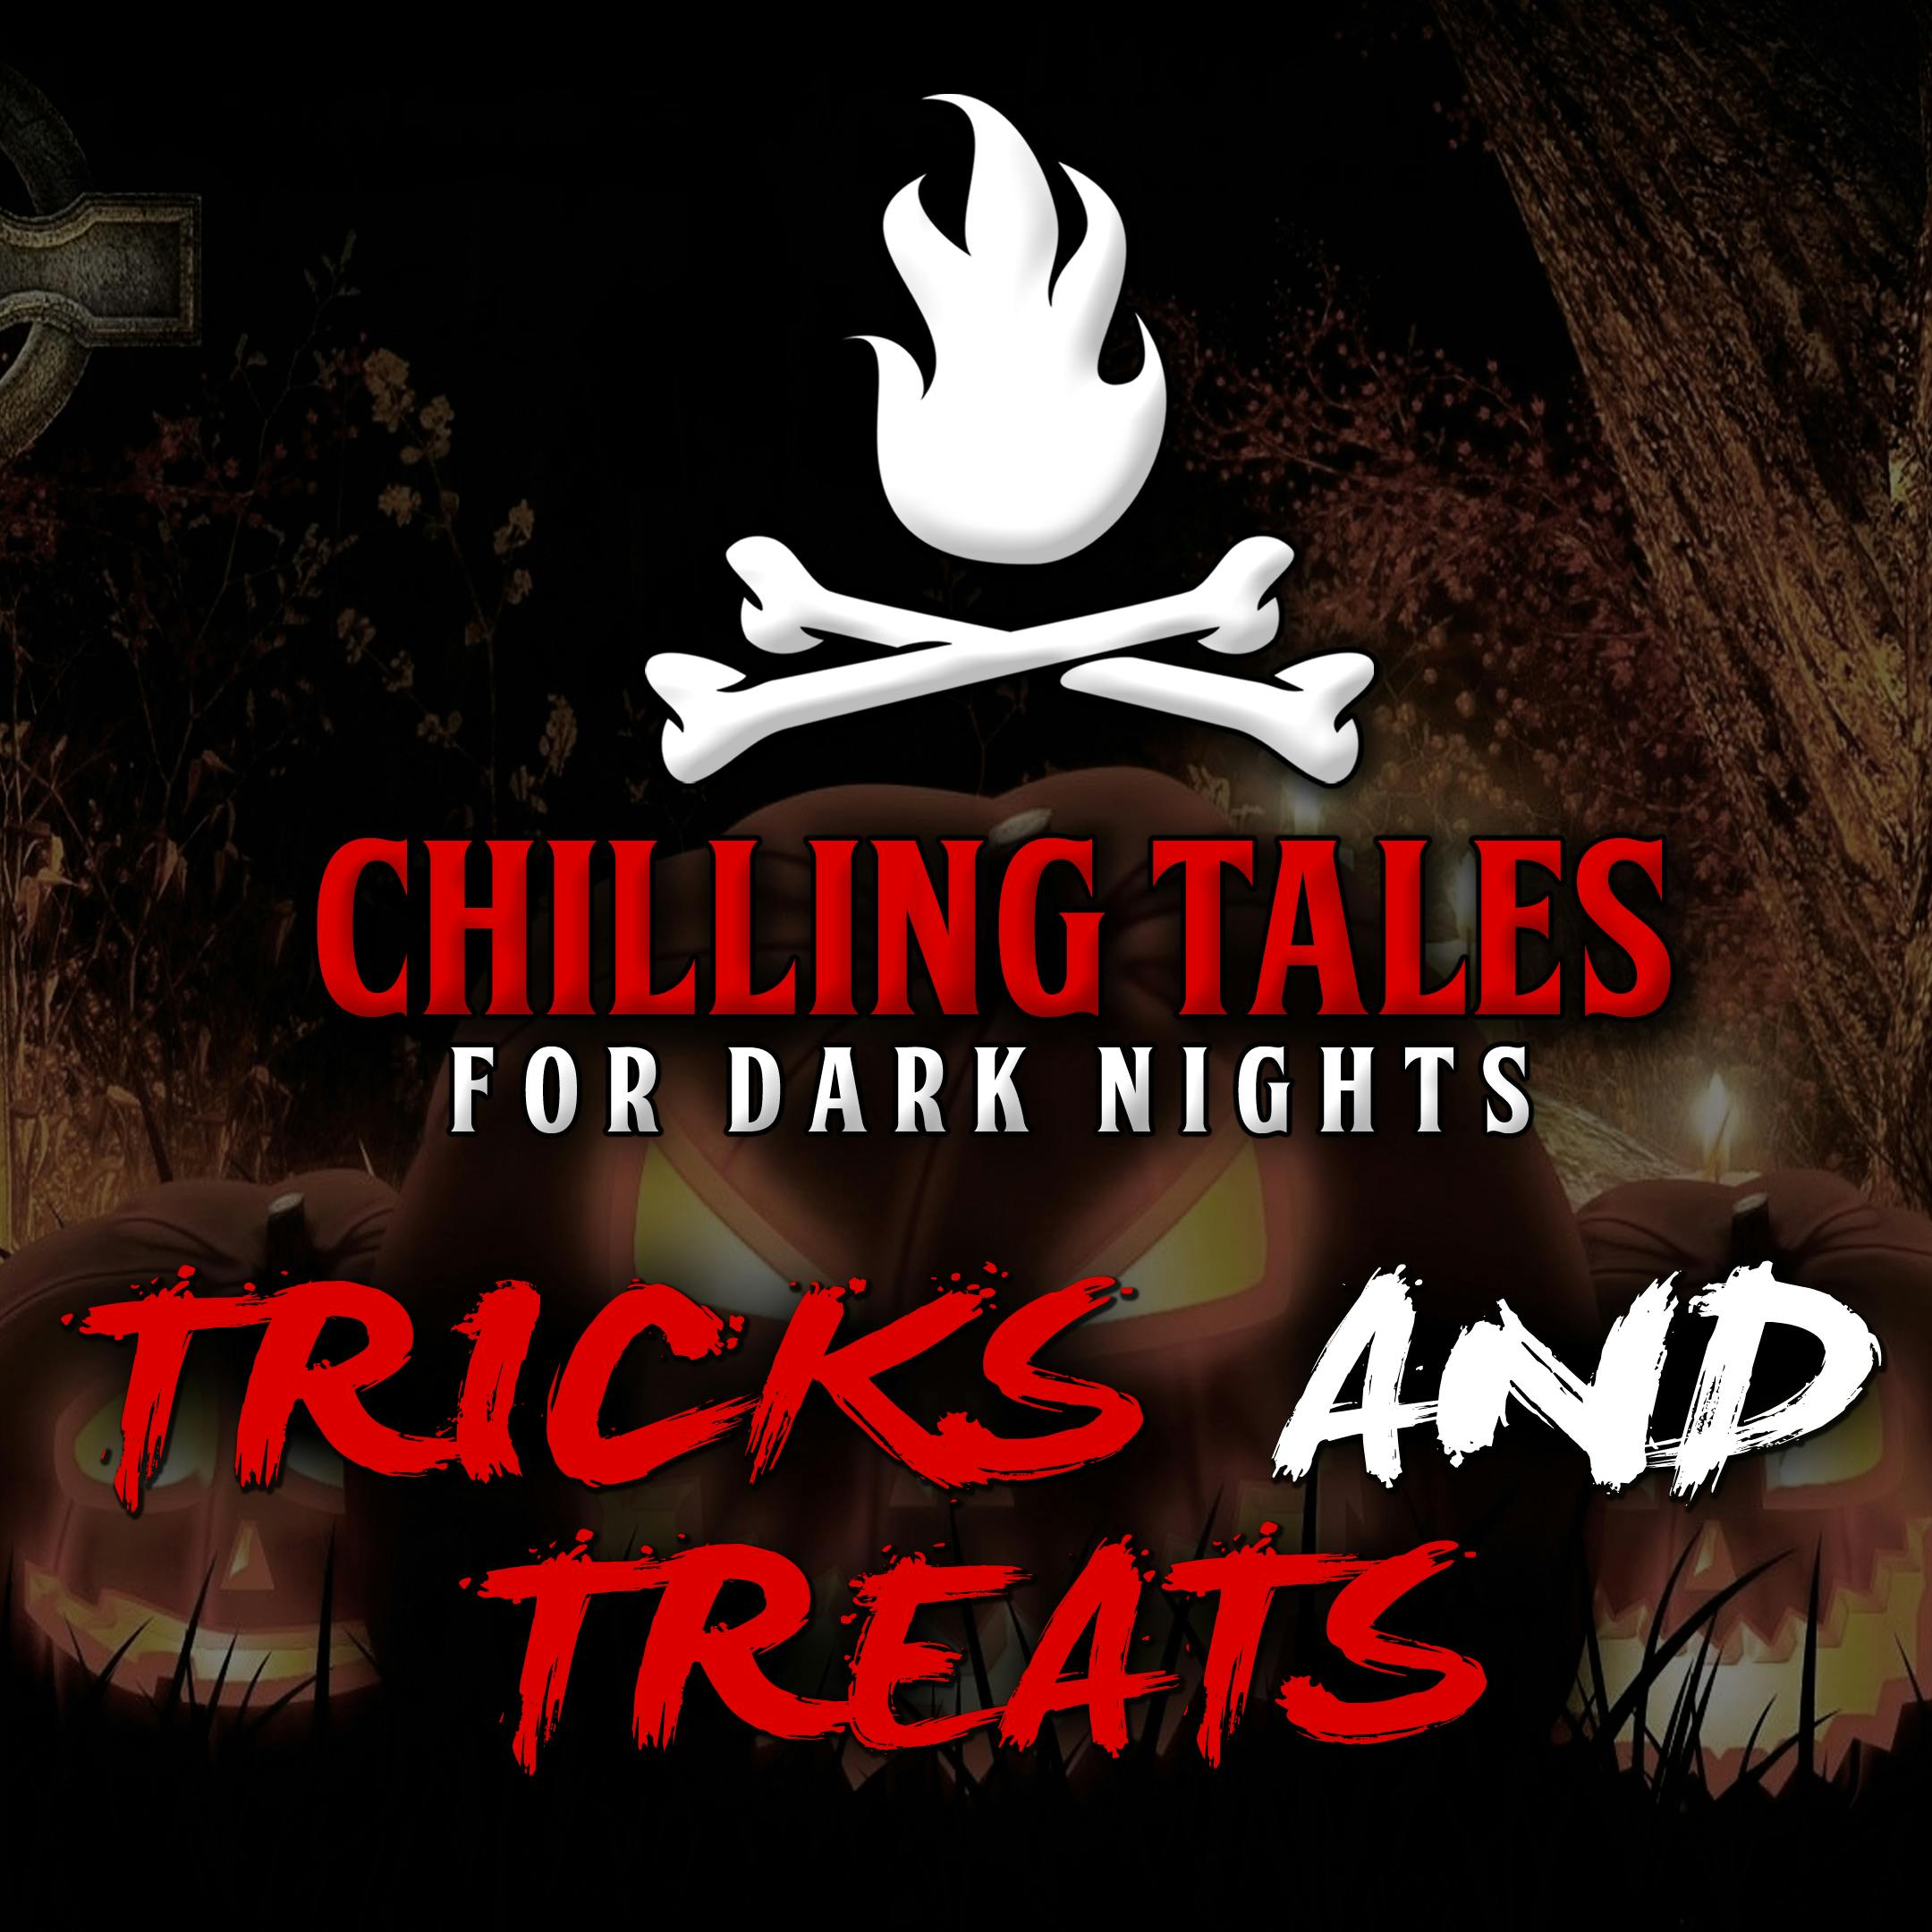 61: Tricks and Treats – Chilling Tales for Dark Nights